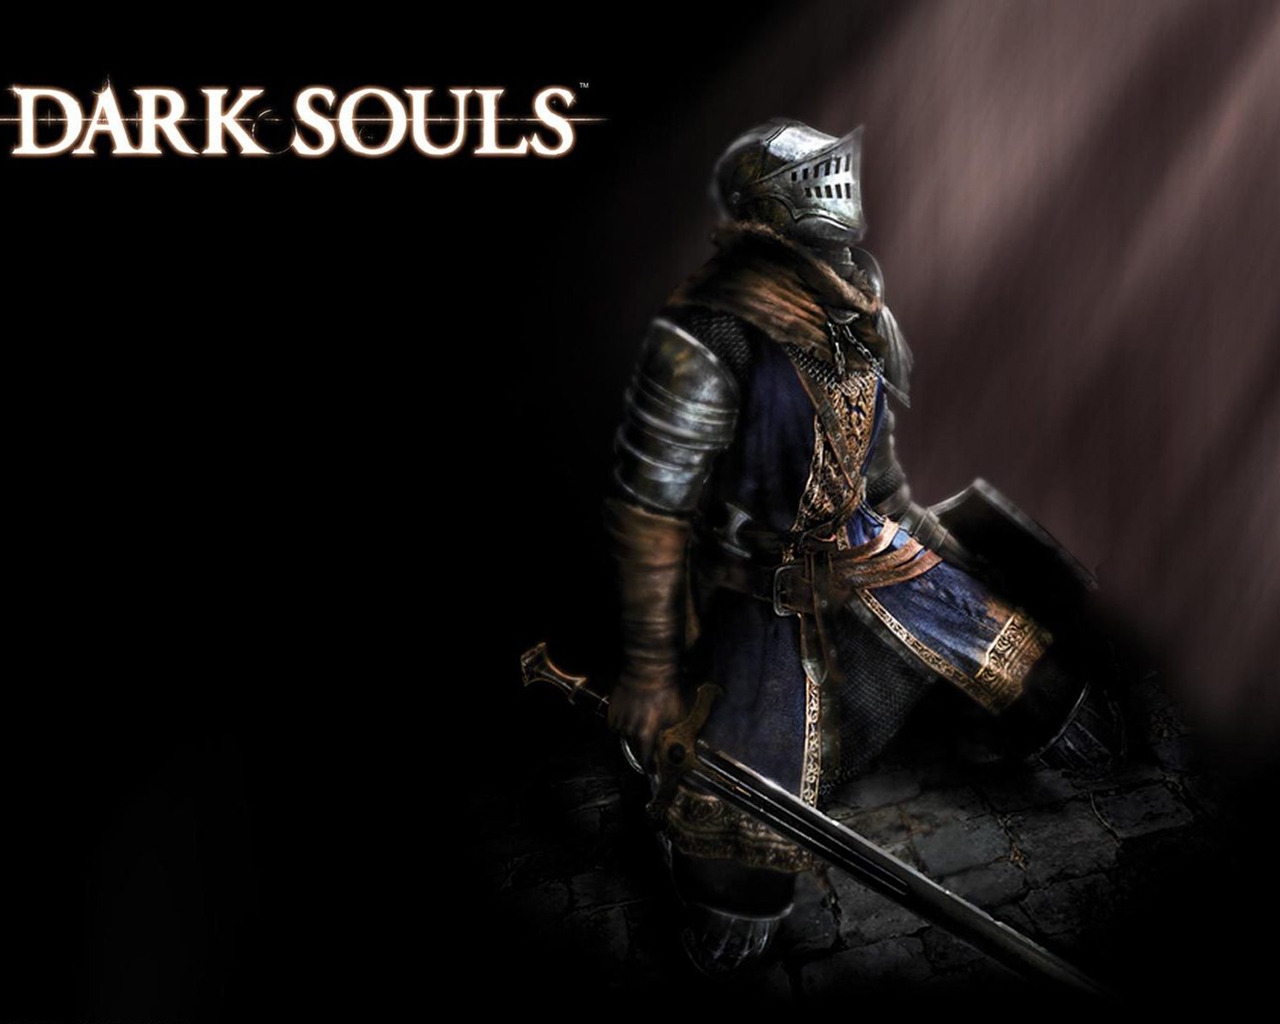 Dark Souls Character for 1280 x 1024 resolution